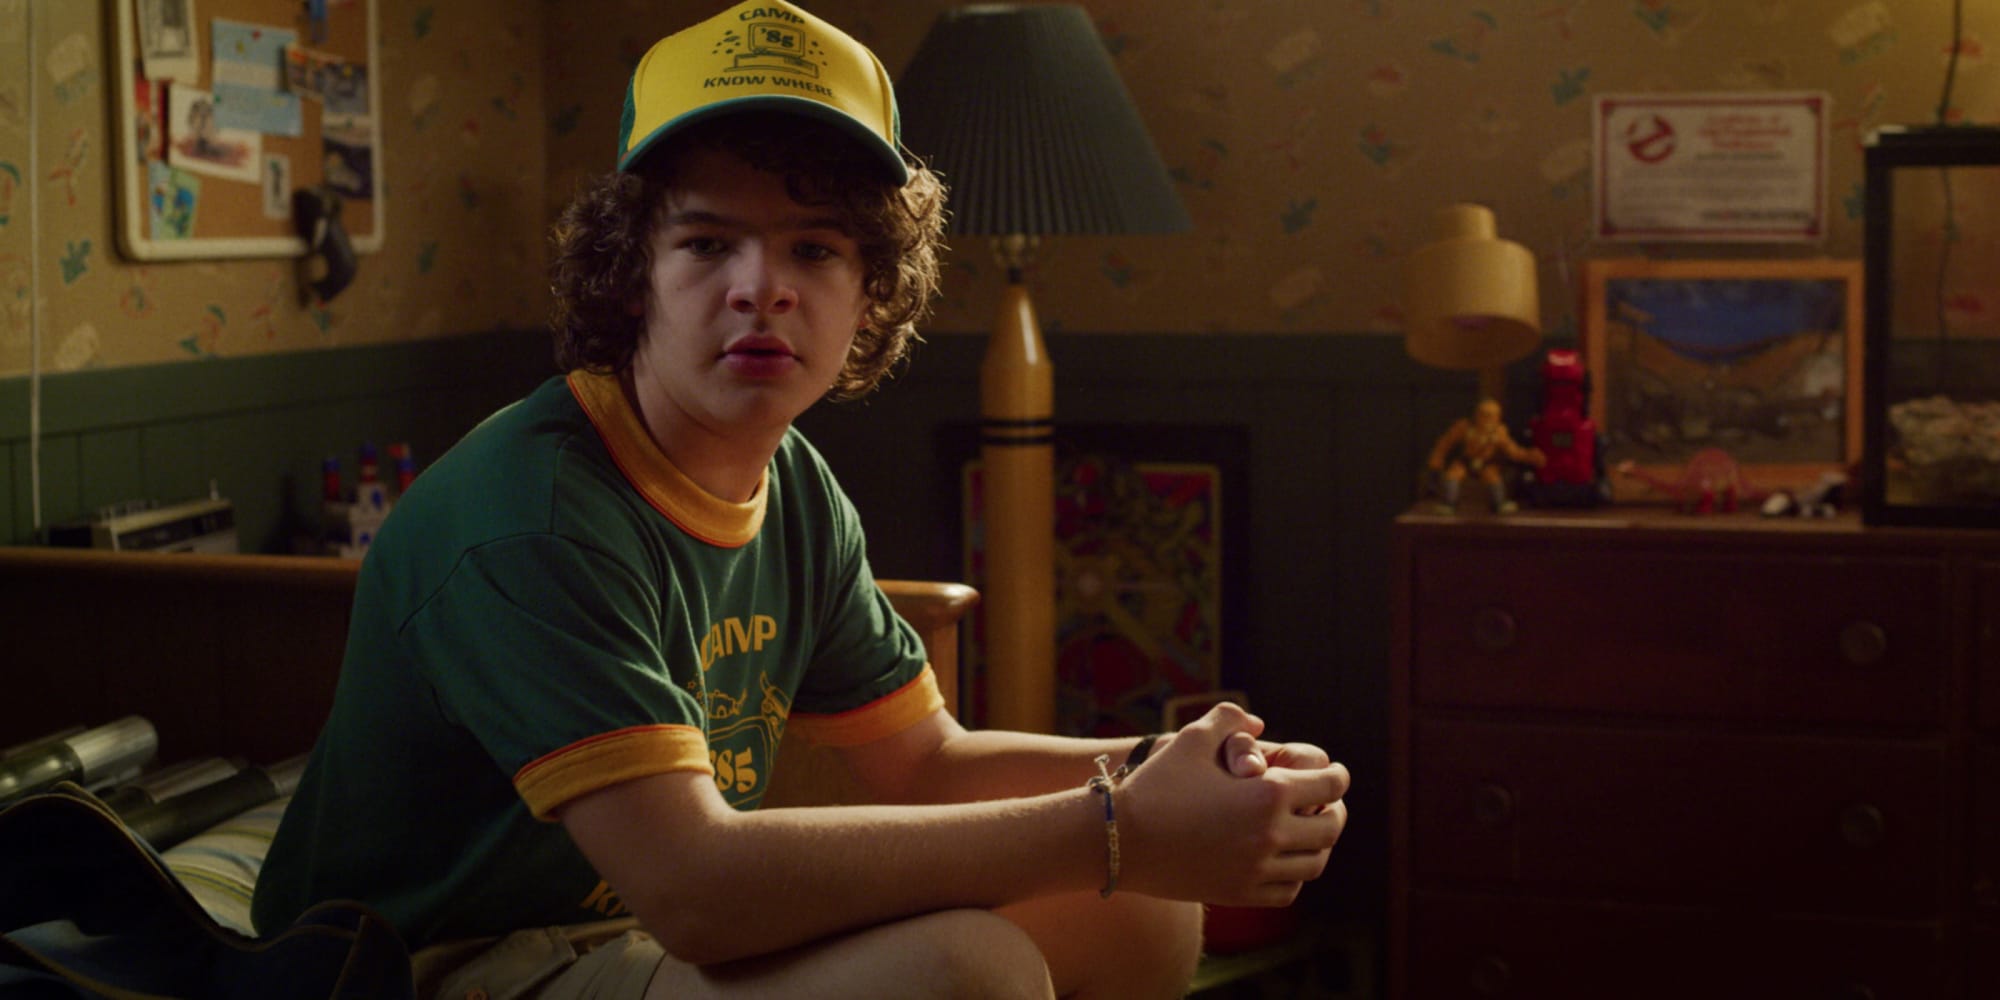 5 Stranger Things spinoffs we want ASAP